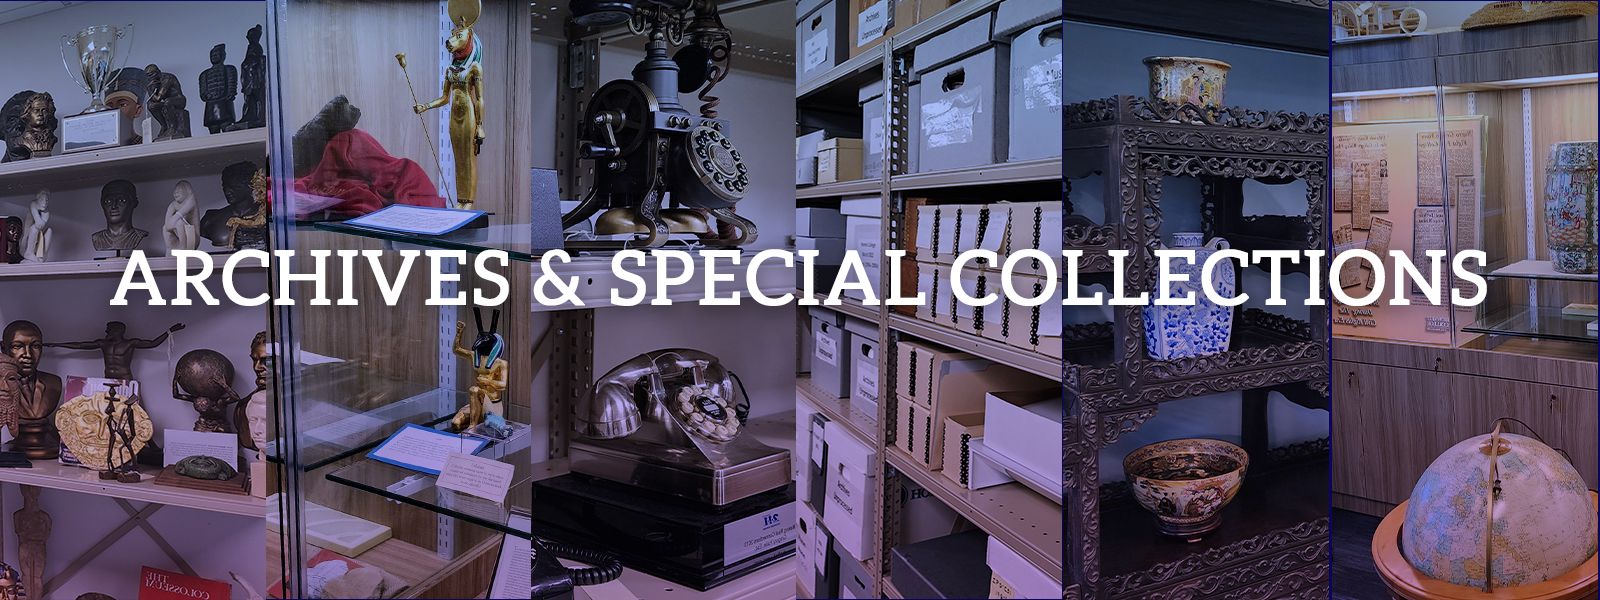 Archives and Special Collections